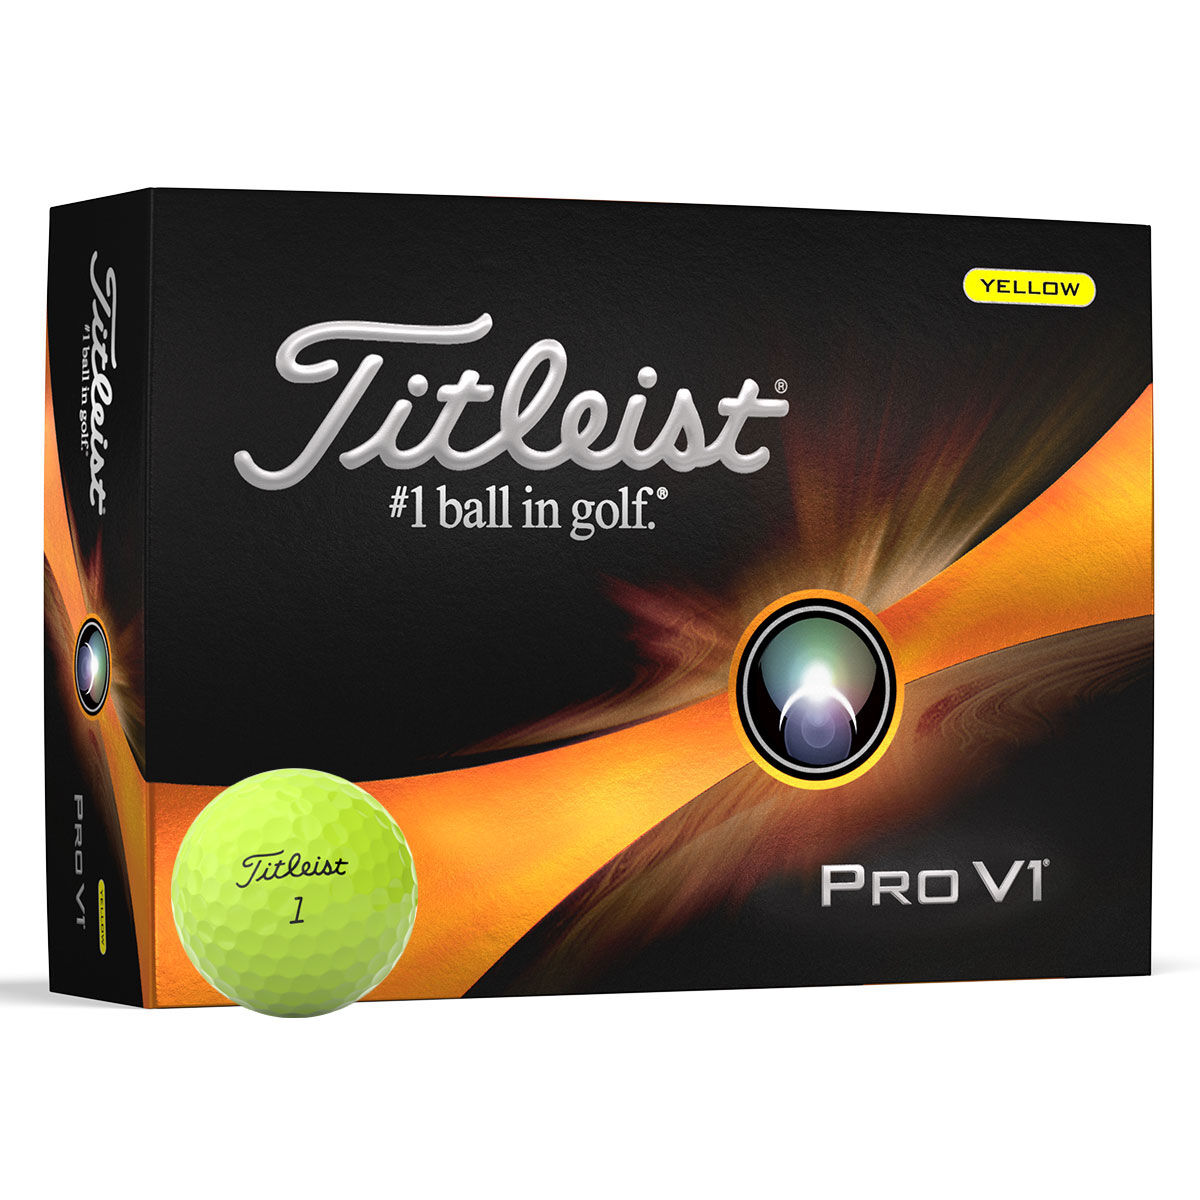 Titleist Golf Ball, Yellow Pro V1 12 Pack | American Golf, One Size